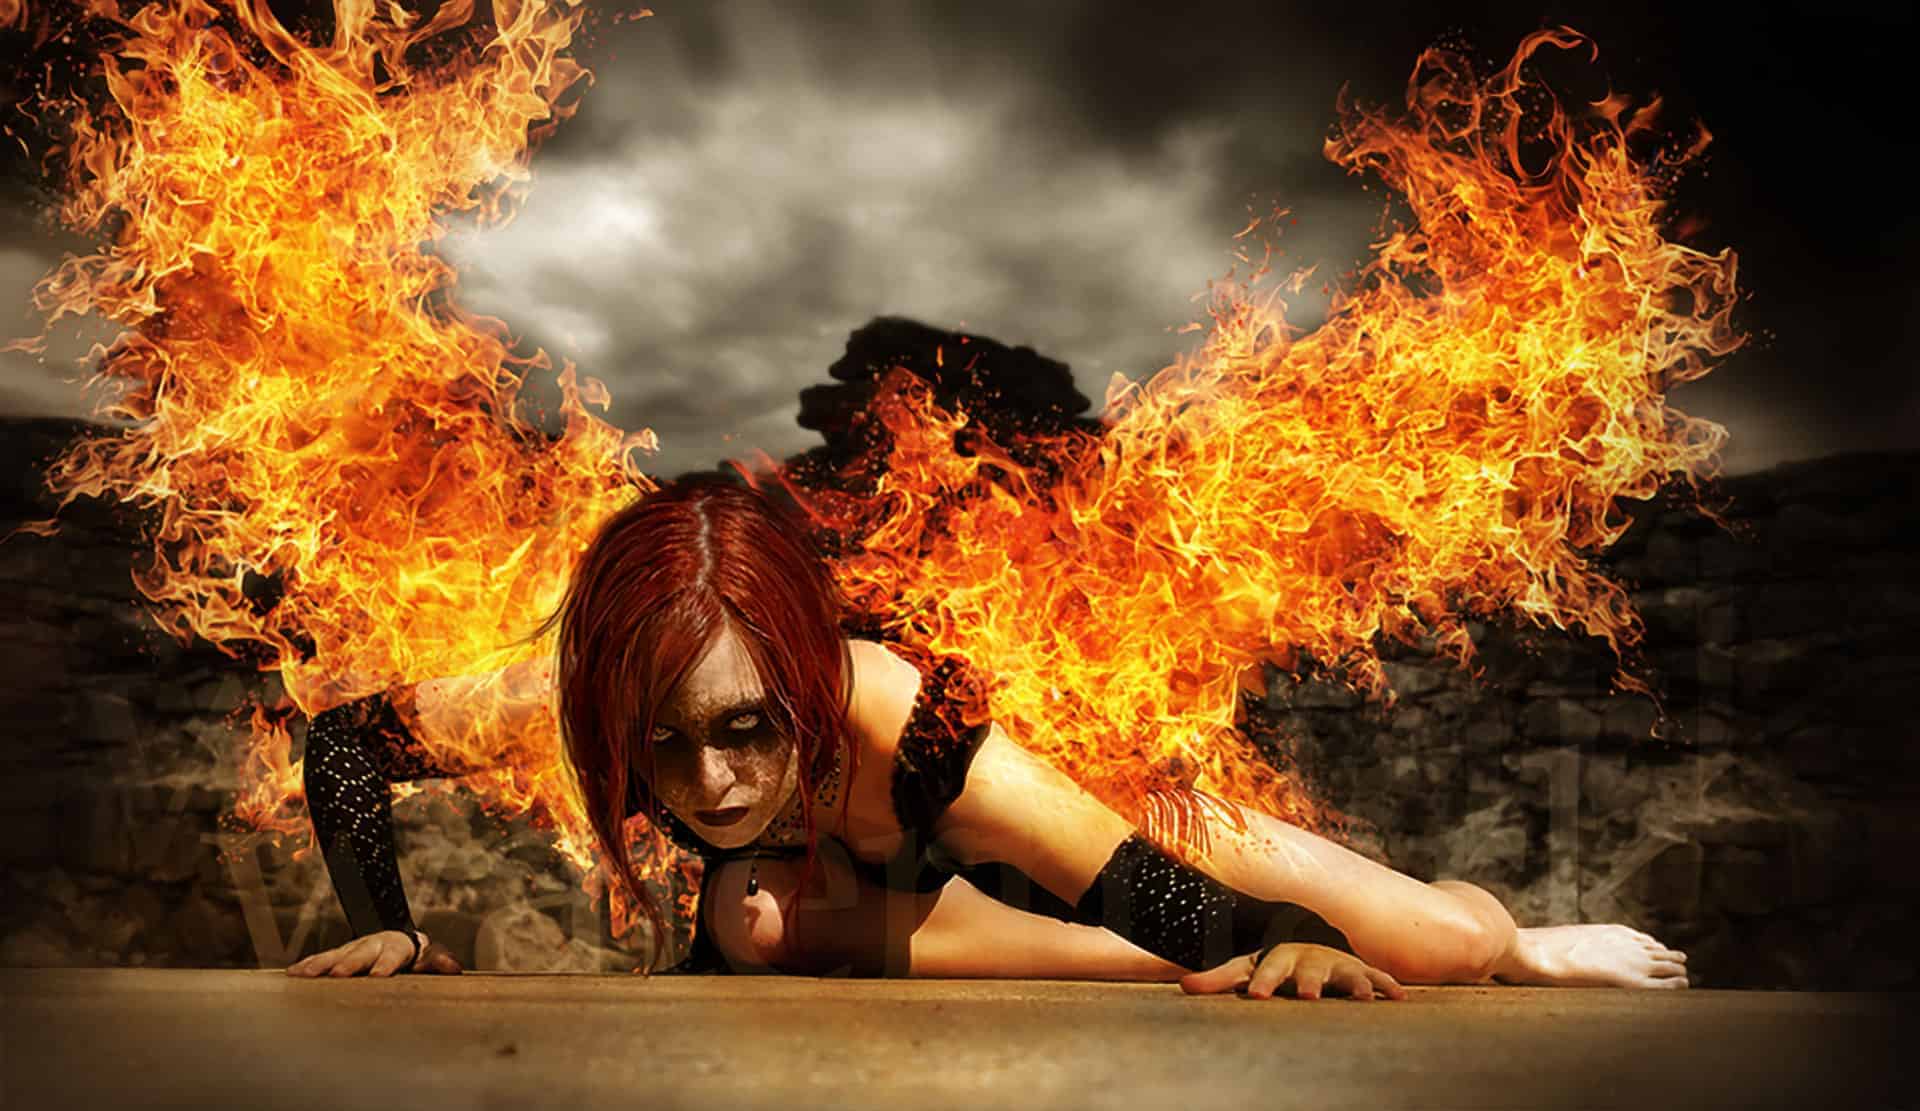 Create an Intense “Wings of Fire” Photo Manipulation